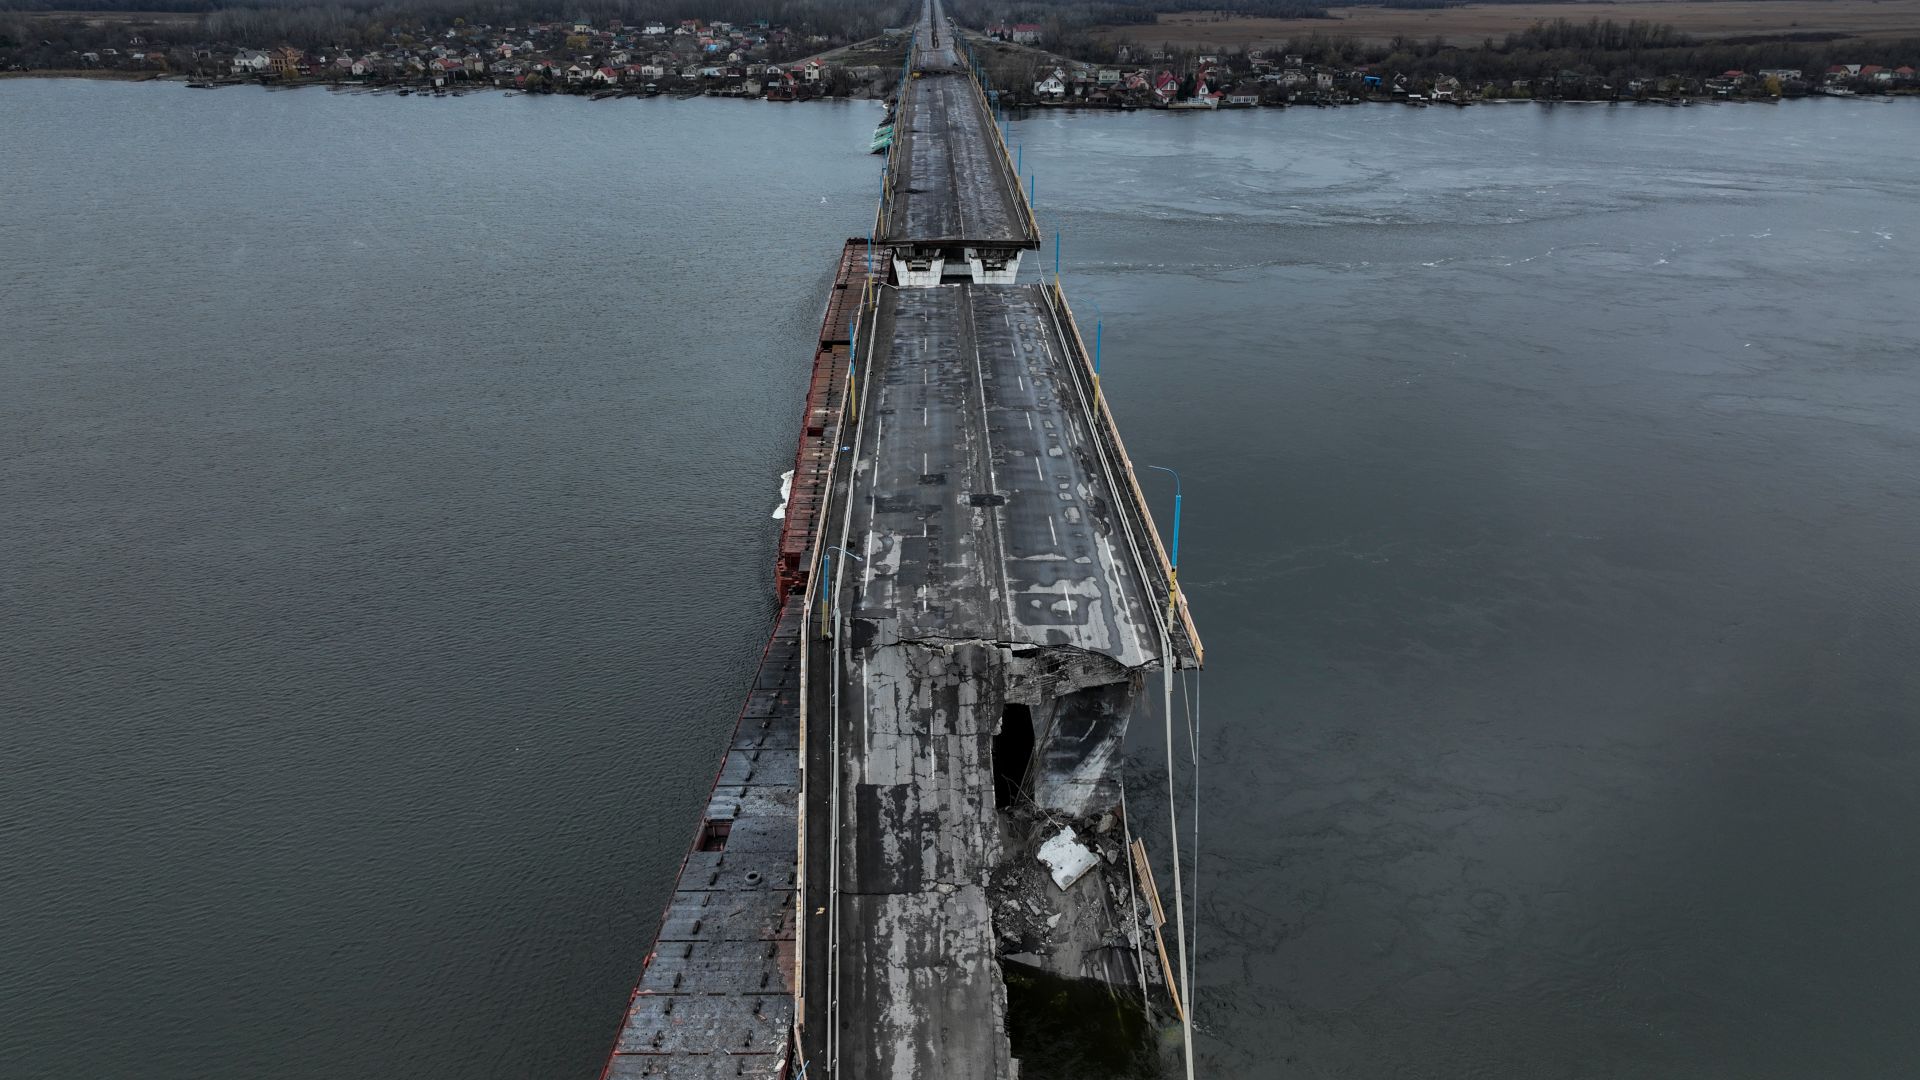 The damaged Antonivsky Bridge is visible in Kherson, Ukraine, Sunday, Nov. 27, 2022. The bridge, the main crossing point over the Dnipro river in Kherson, was destroyed by Russian troops in earlier November, after Kremlin's forces withdrew from the southern city. (AP Photo/Bernat Armangue)